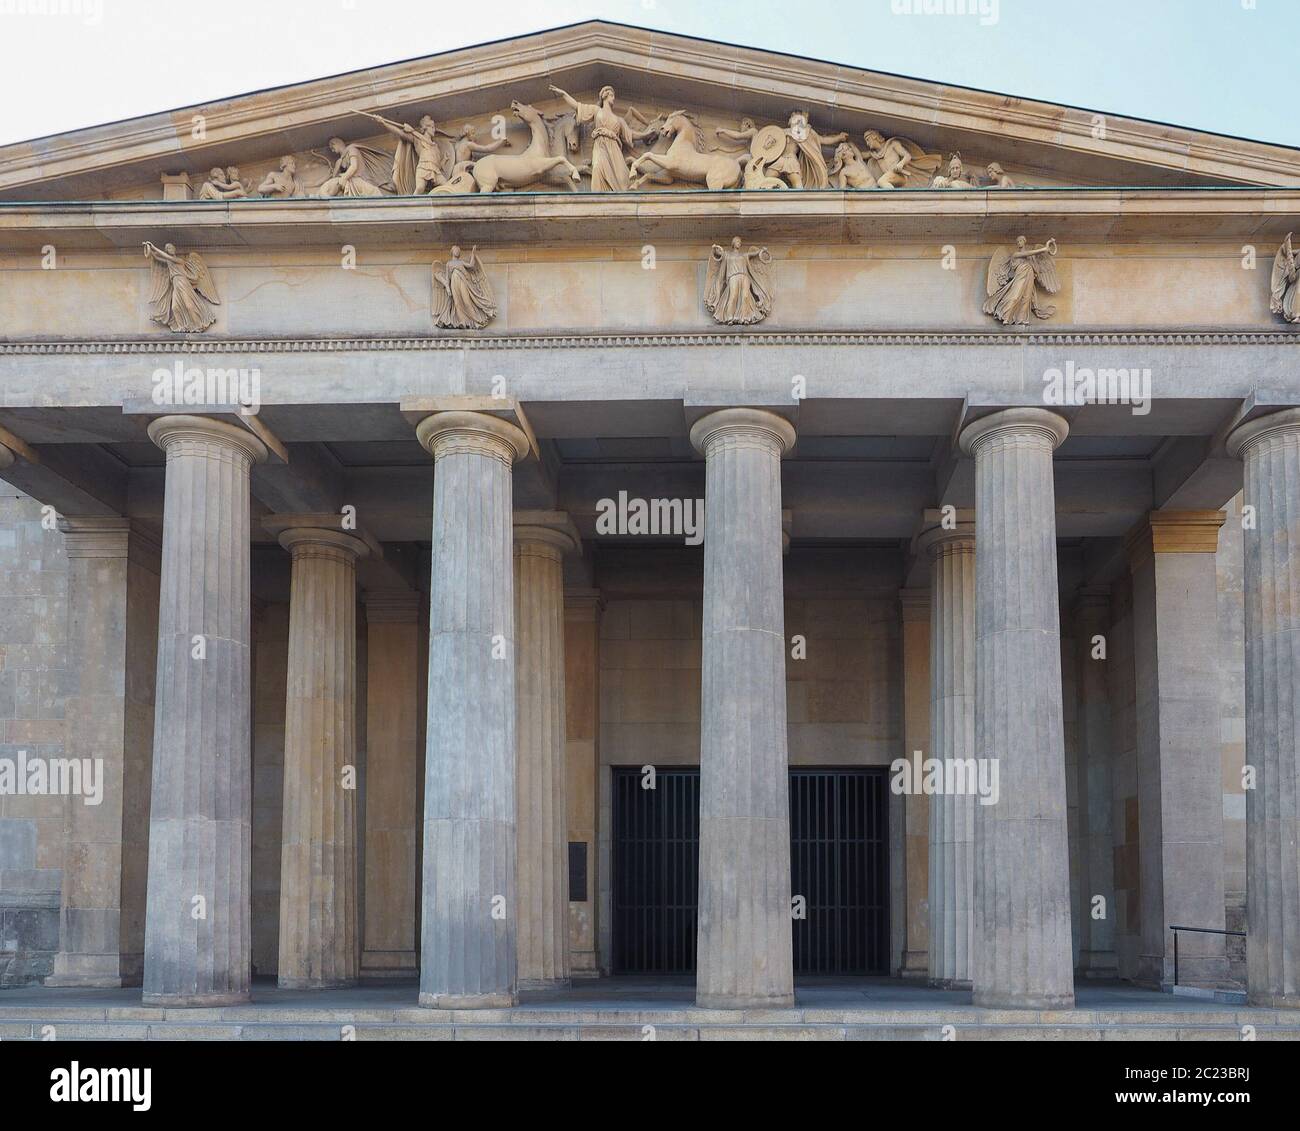 Neue Wache (meaning New Guardhouse) Central Memorial of the Federal Republic of Germany for the Victims of War and Dictatorship in Berlin, Germany Stock Photo